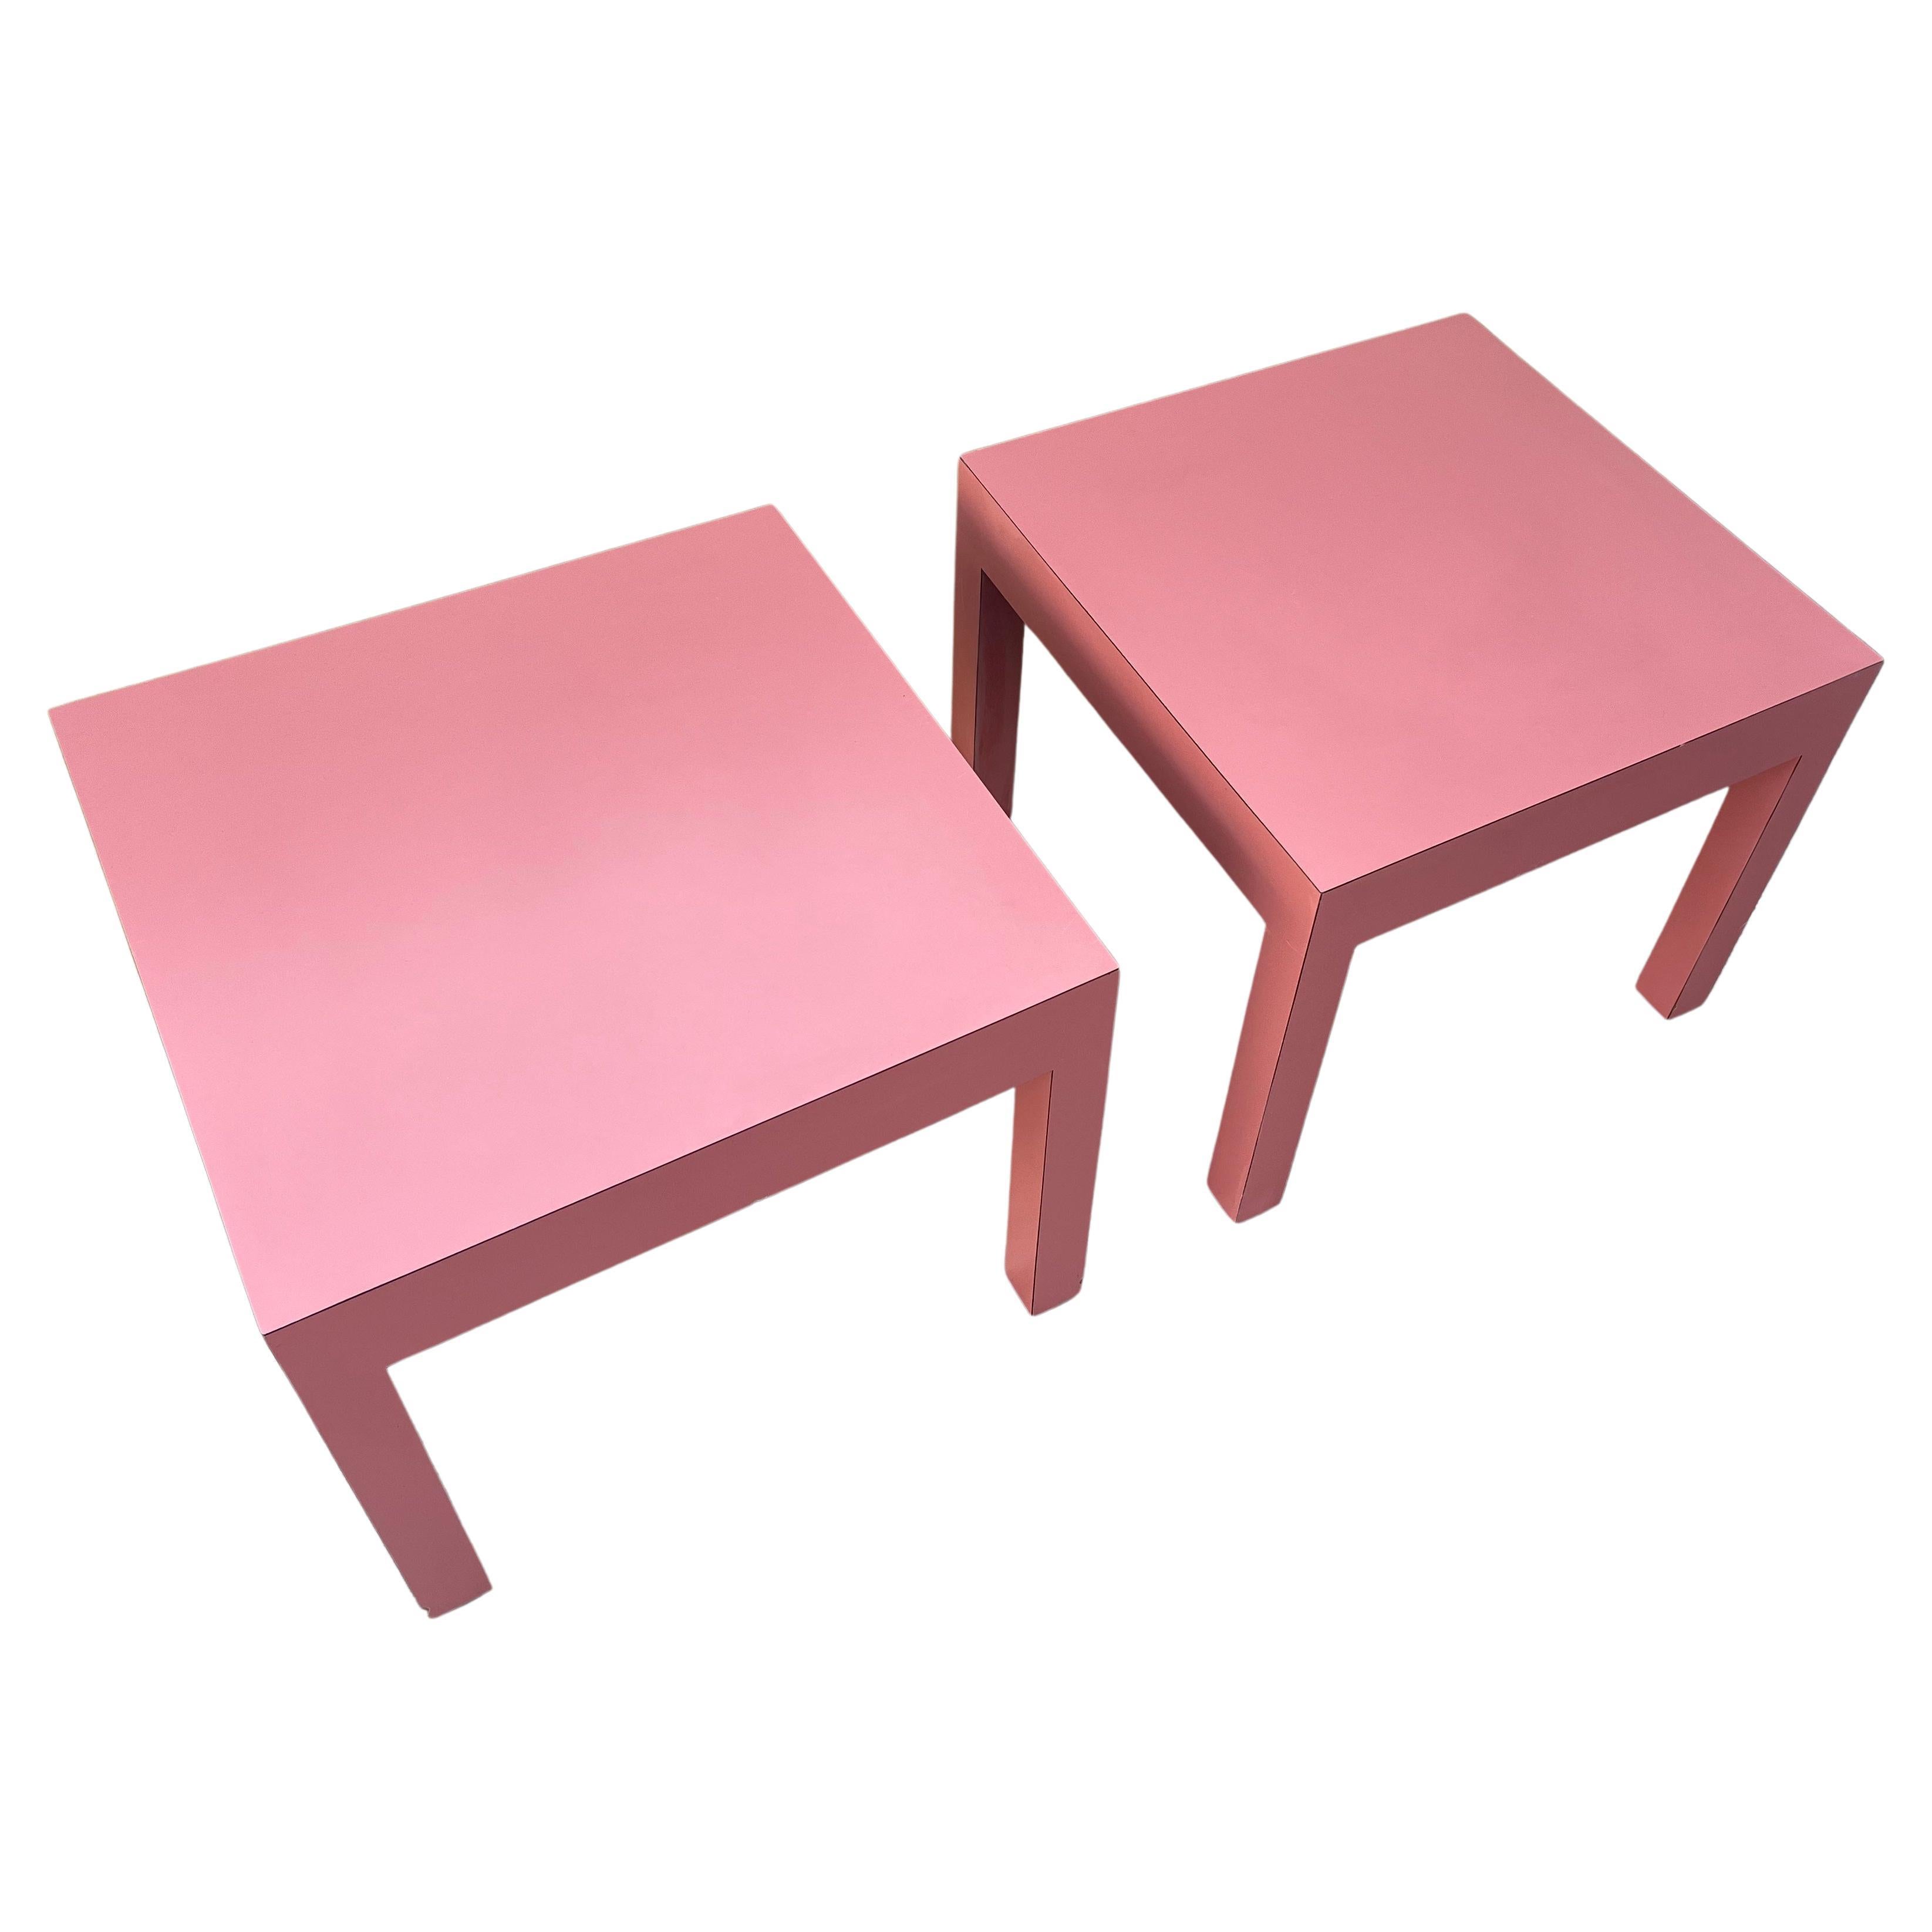 A Pair of Postmodern Laminate Side Tables by Lane Altavista. Circa 1970s For Sale